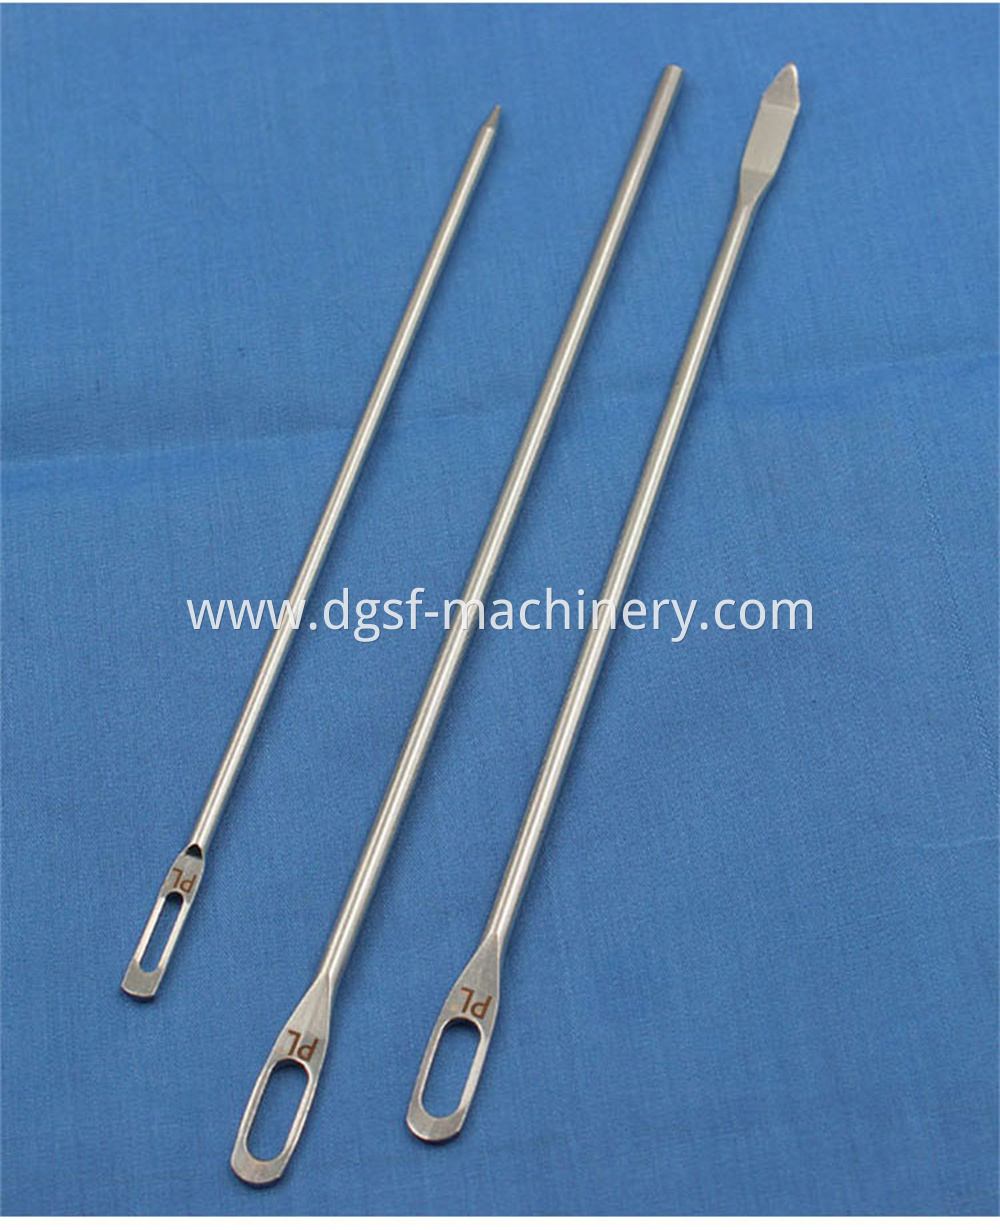 Pl Boutique Trousers Waist Rope Threading Needle 3 Jpg